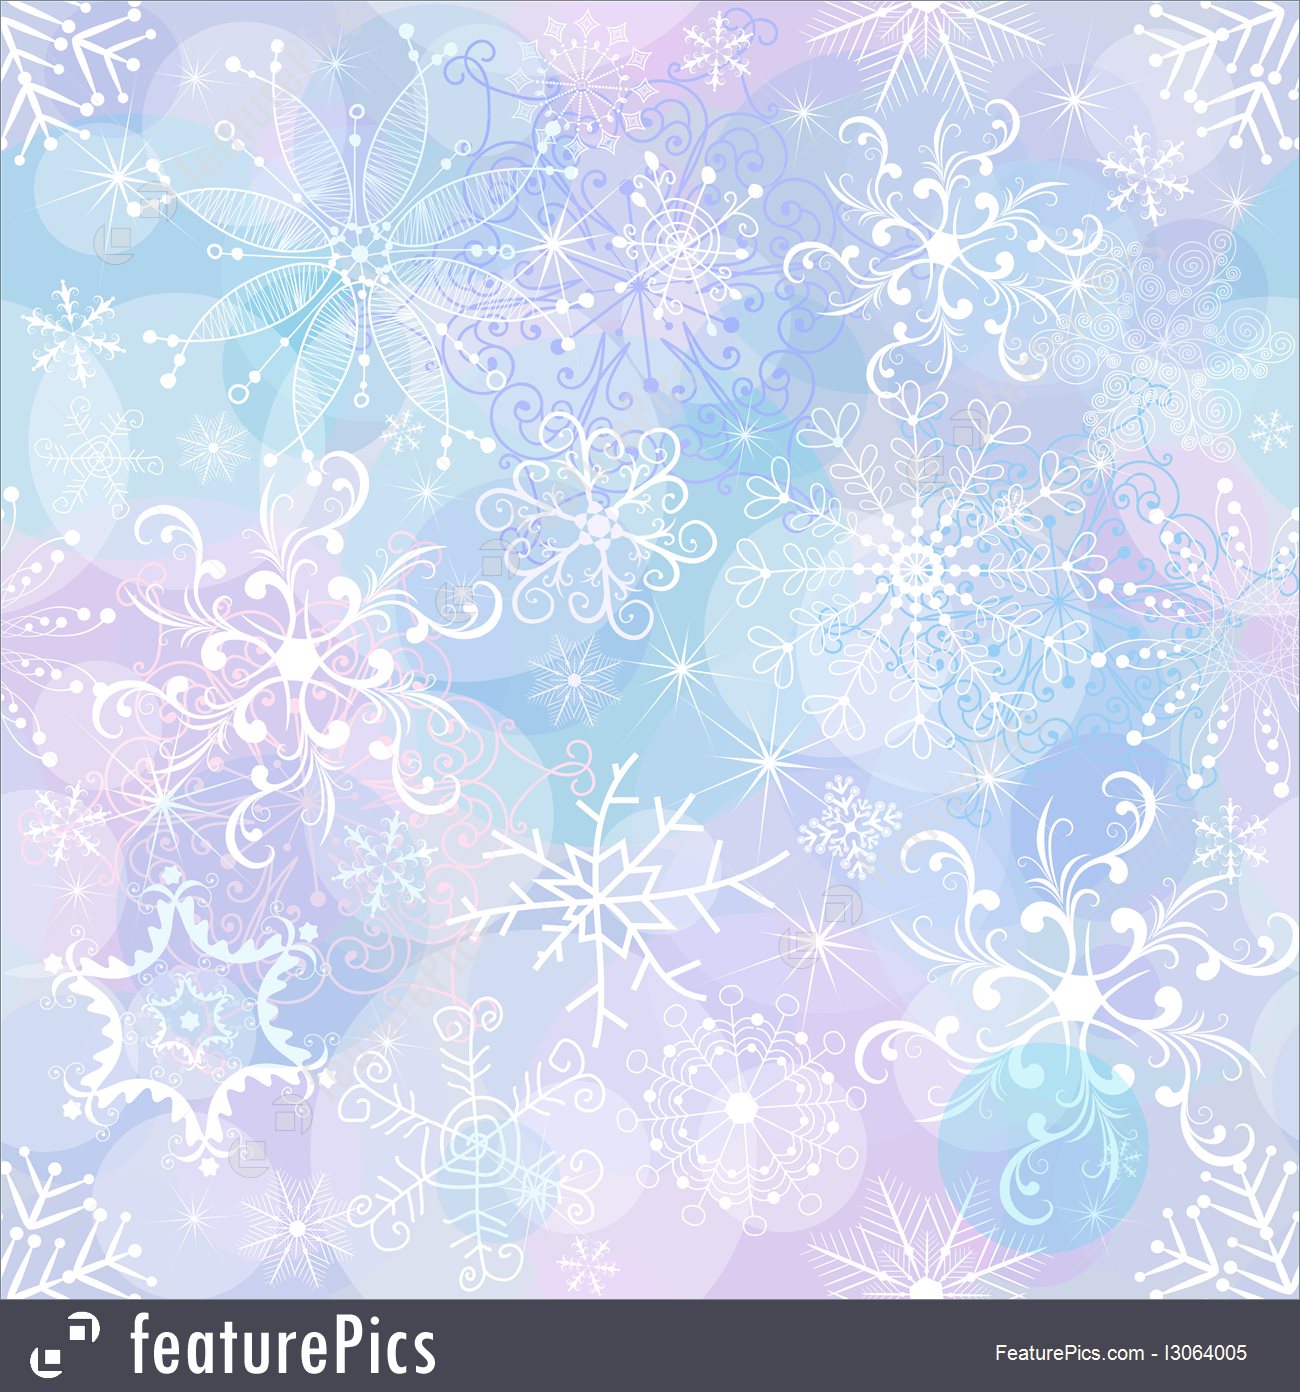 Seamless Gentle Christmas Pattern With Chaotic Snowflakes - Purple Turquoise And Pink Snowflake - HD Wallpaper 